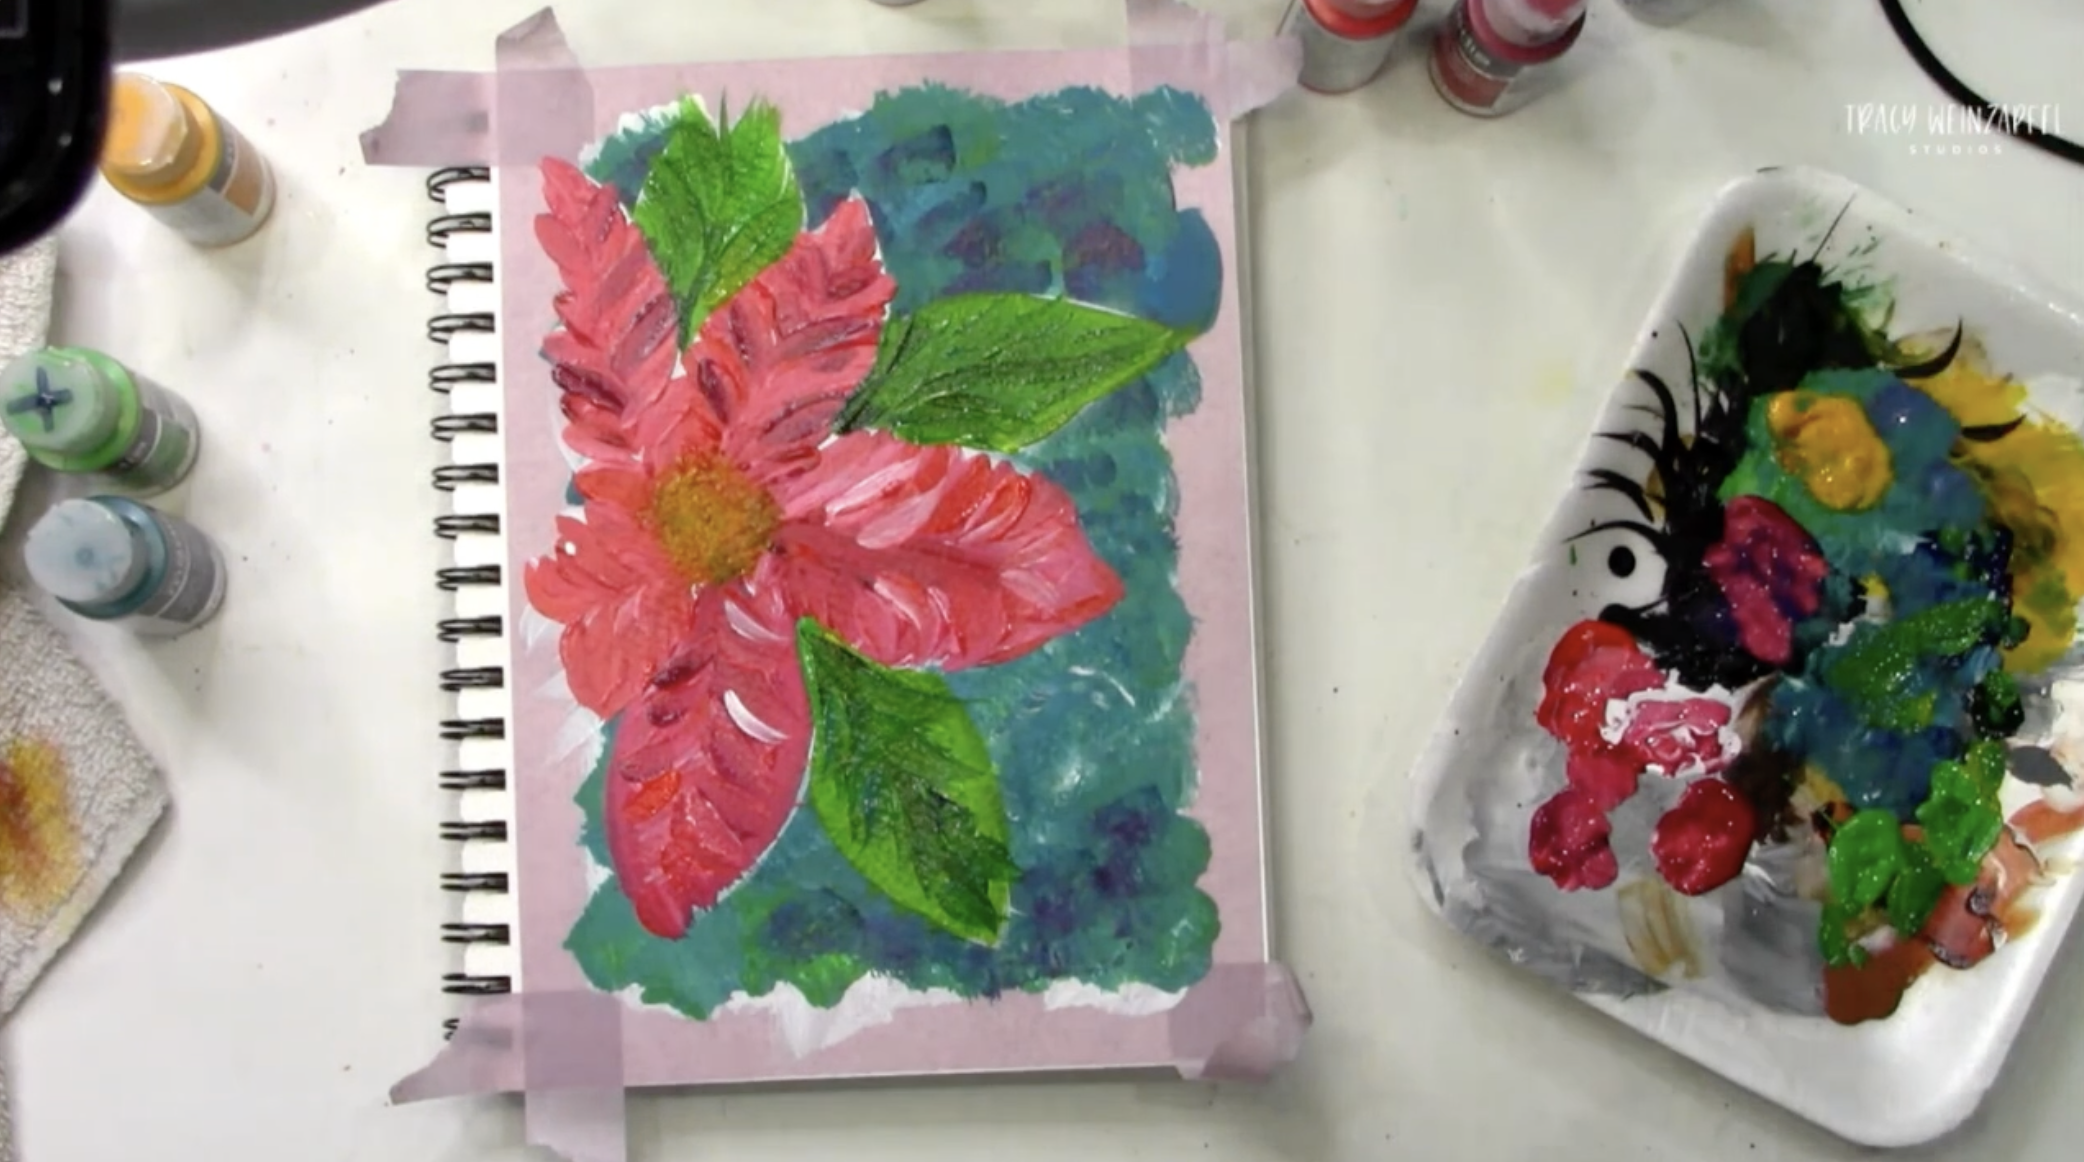 painting the poinsettia flower